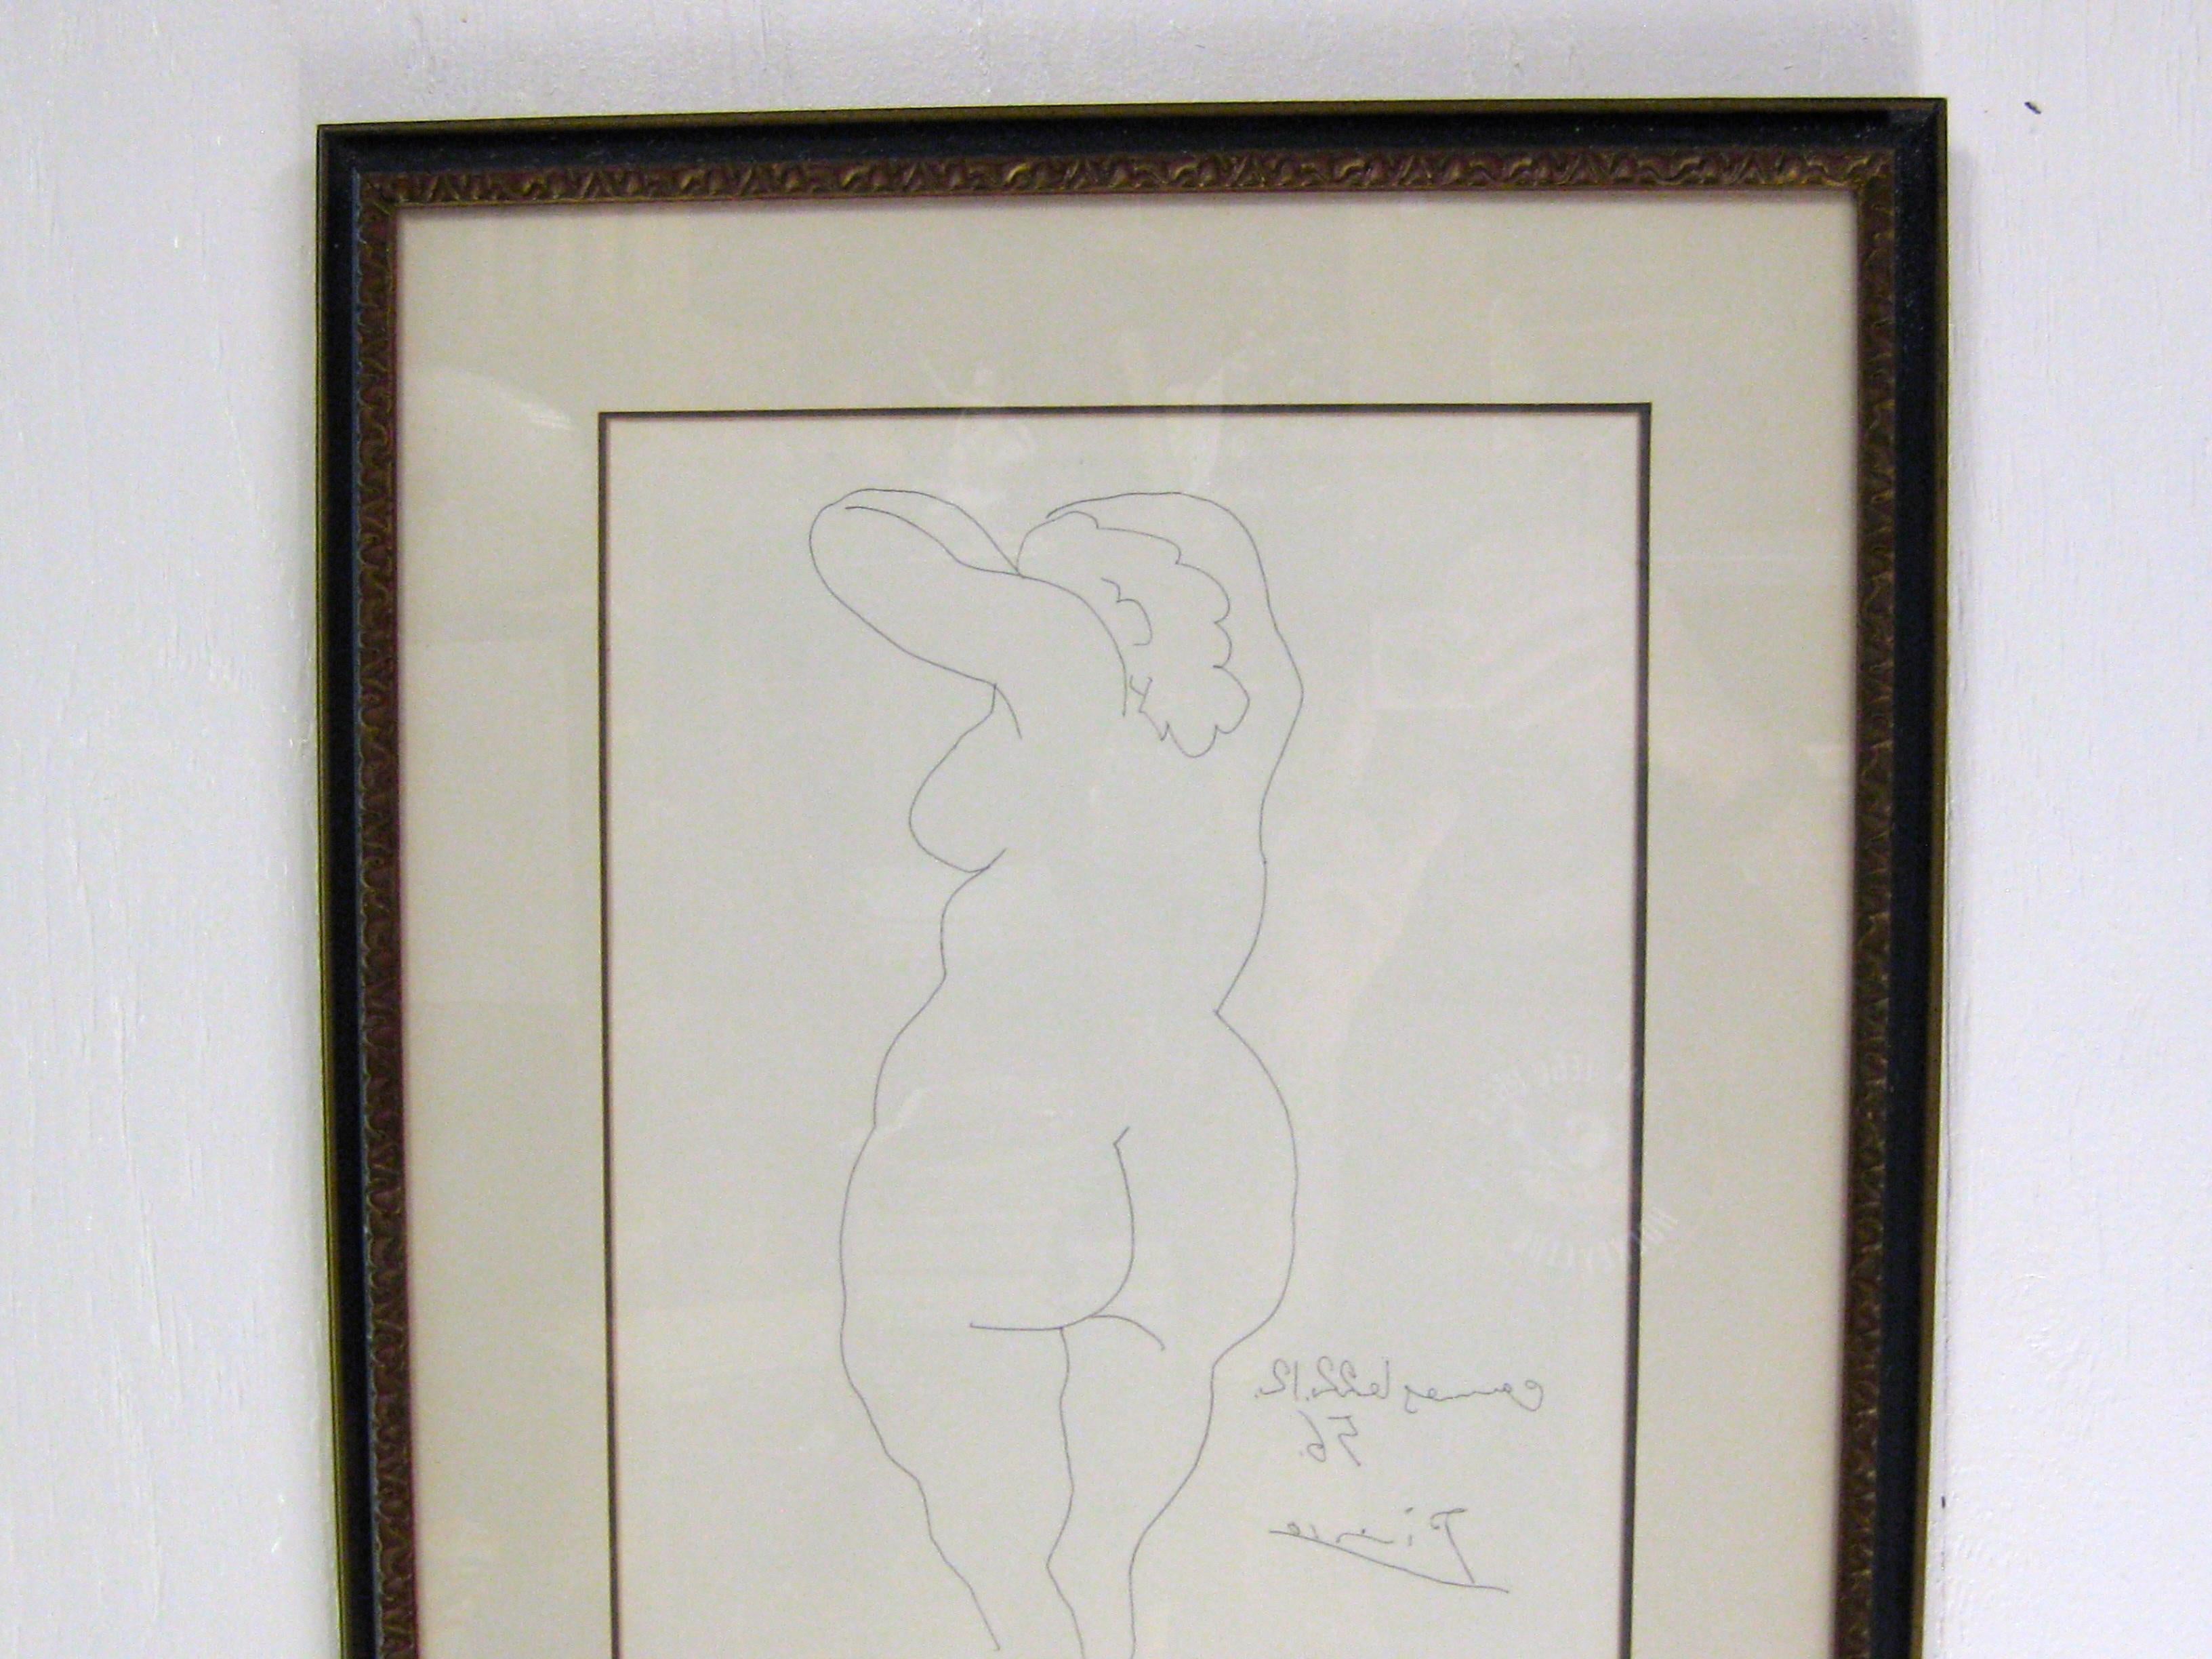 Wonderful Pablo Picasso etching, circa 1956 and published by the Collector’s Guild in New York City. Comes in its original gilt wood frame and with an off white matting. The etching is under glass. In very nice original condition. Frame is in very